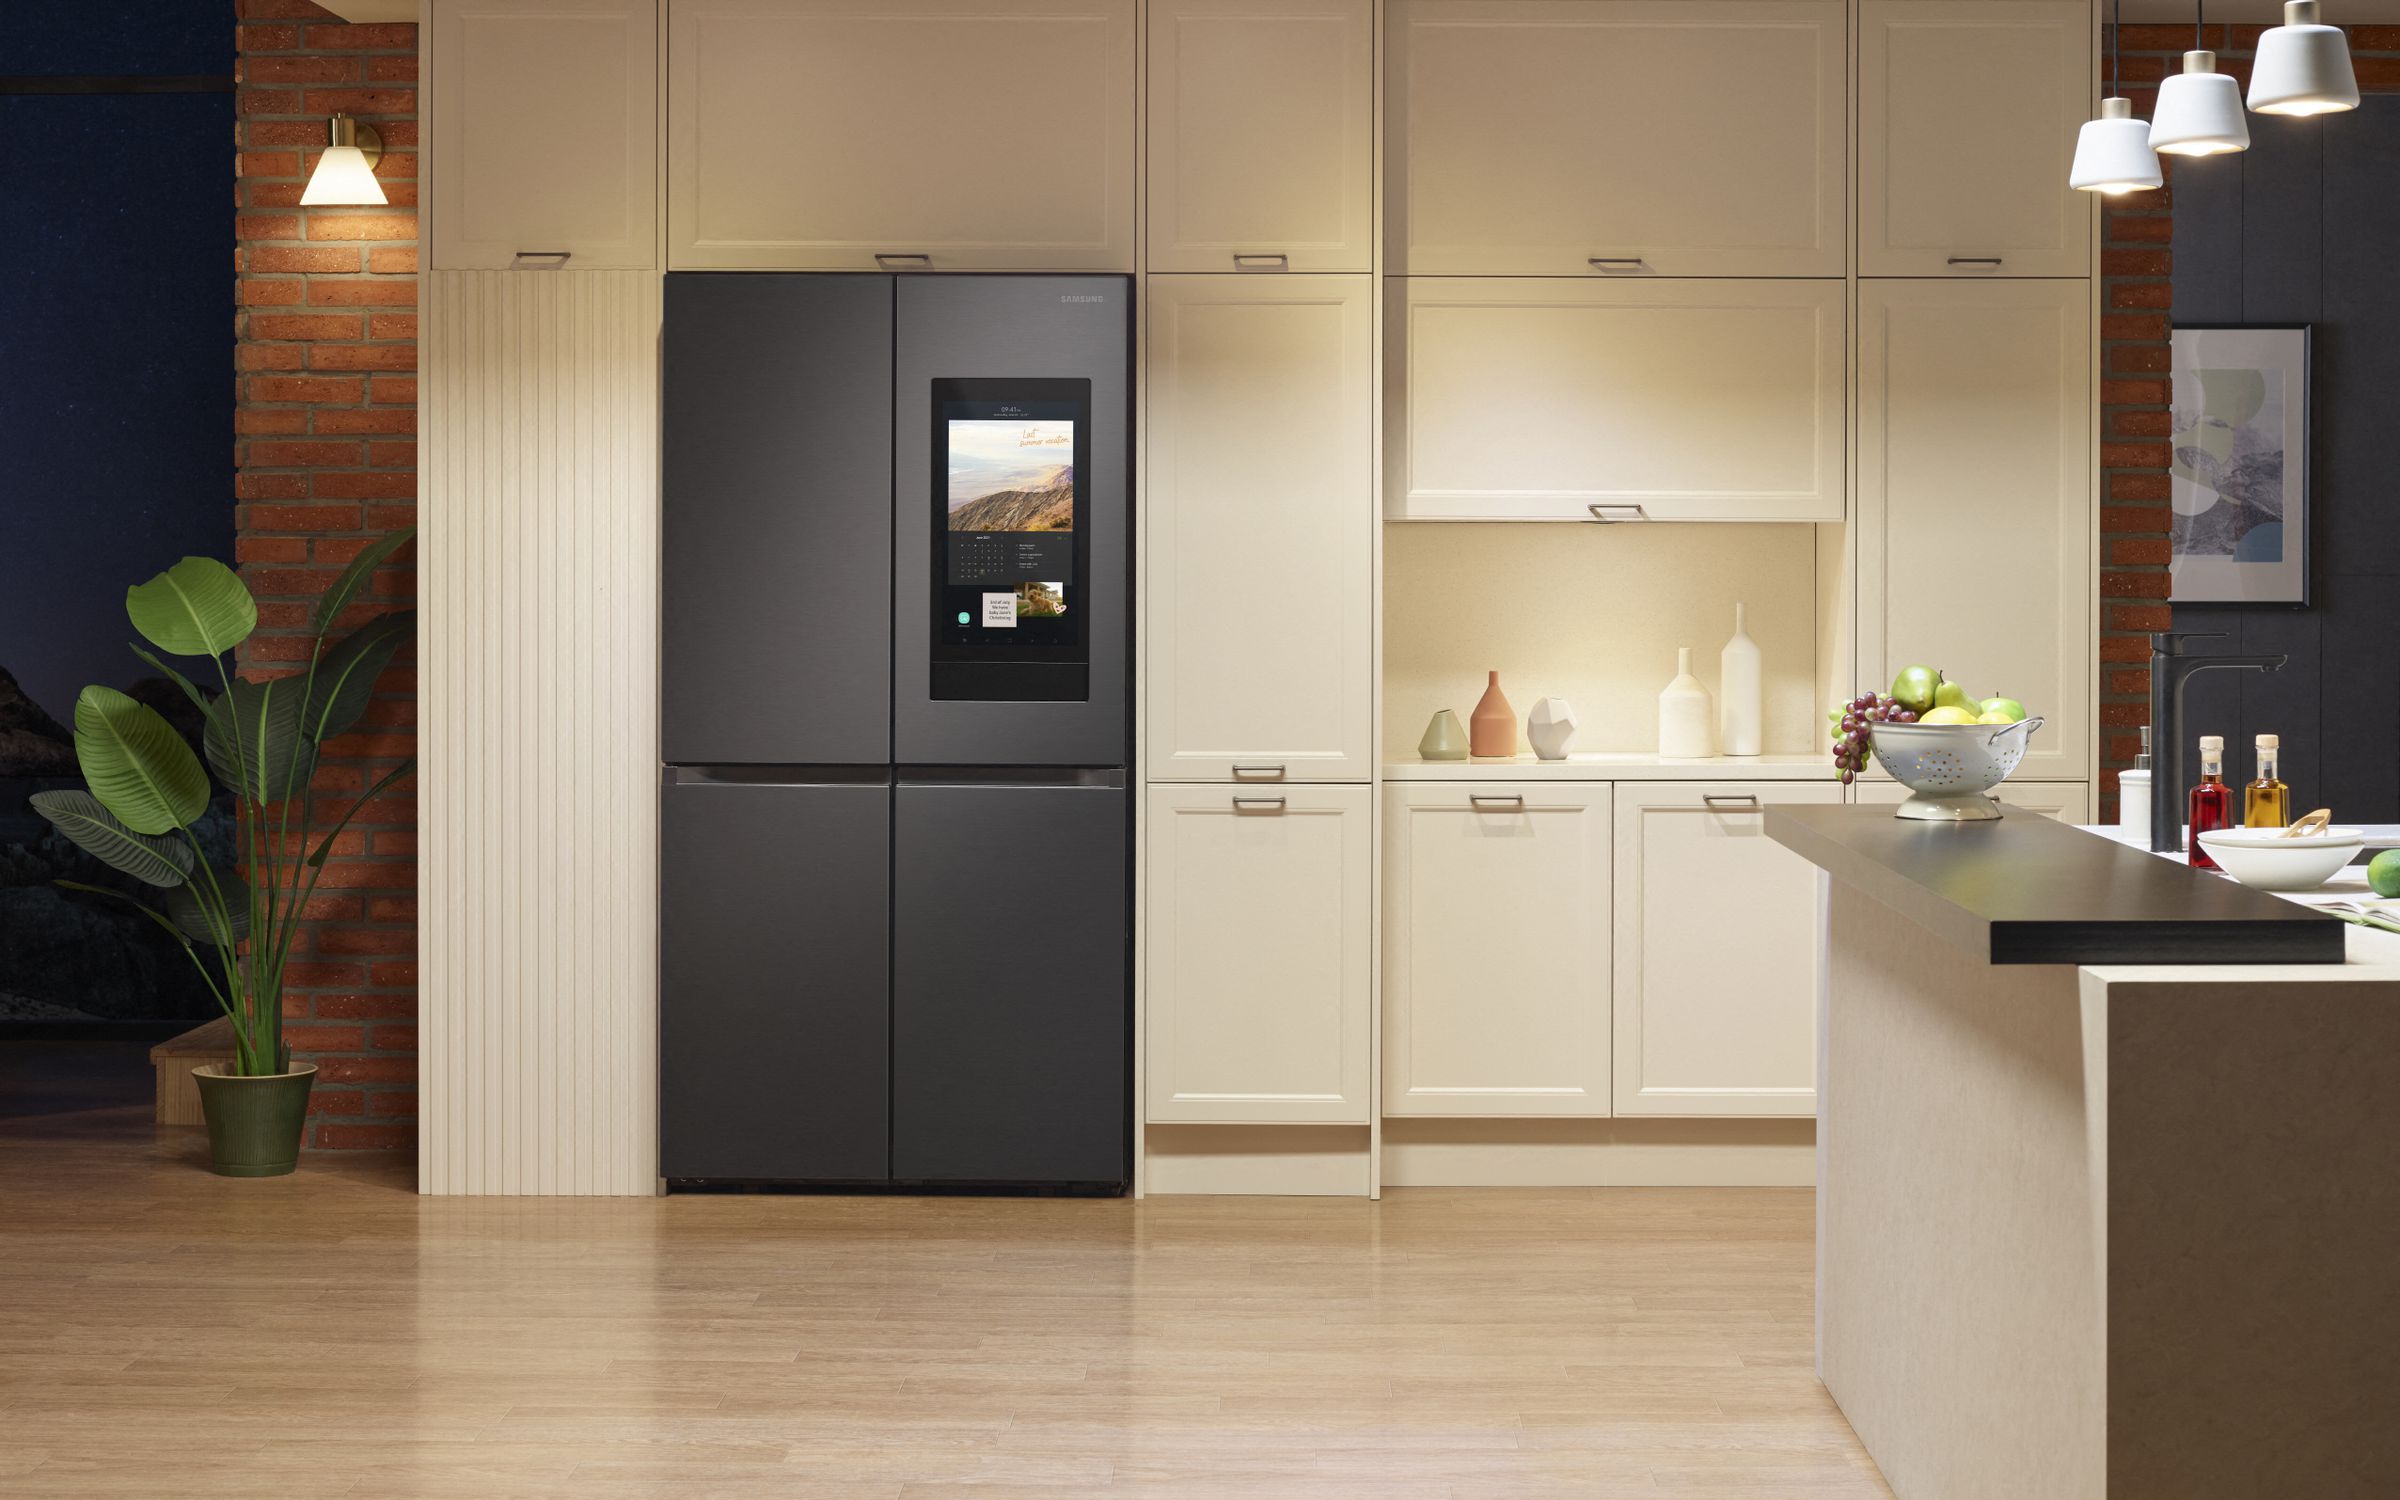 The Family Hub fridge is getting an upgrade to Samsung’s Bespoke line.